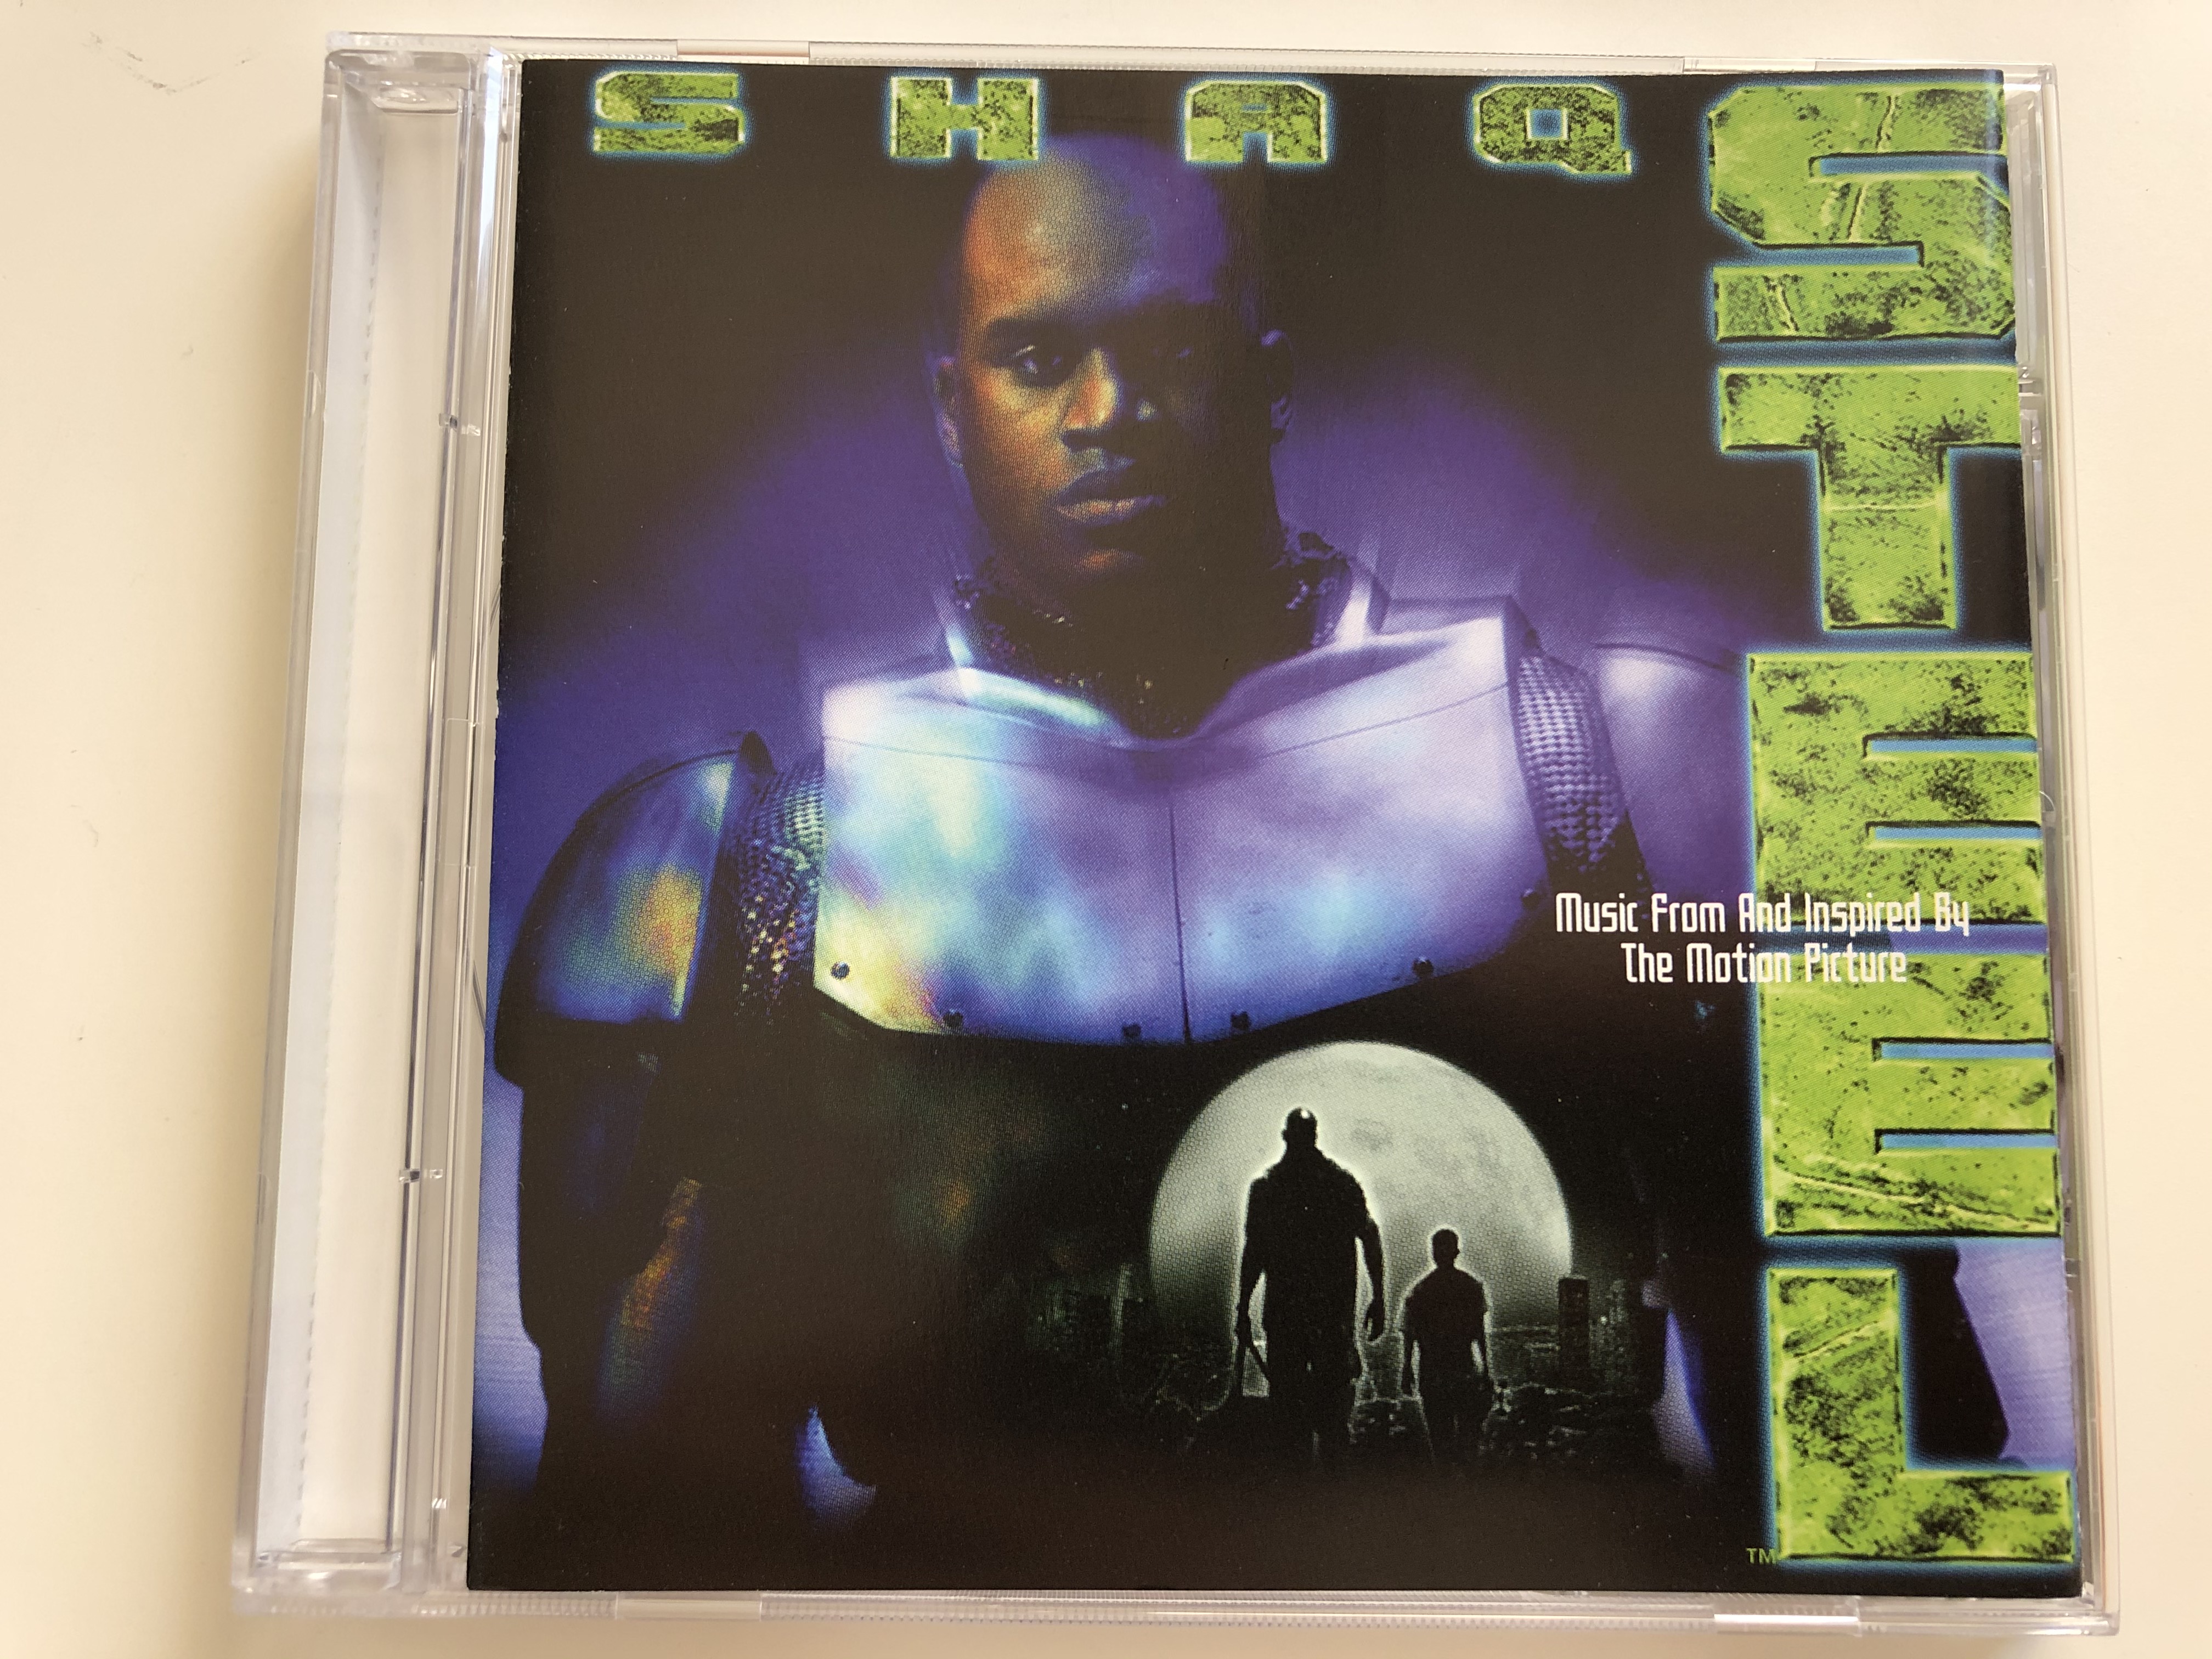 shaq-steel-music-from-and-inspired-by-the-motion-picture-qwest-records-audio-cd-1997-9362-46678-2-1-.jpg